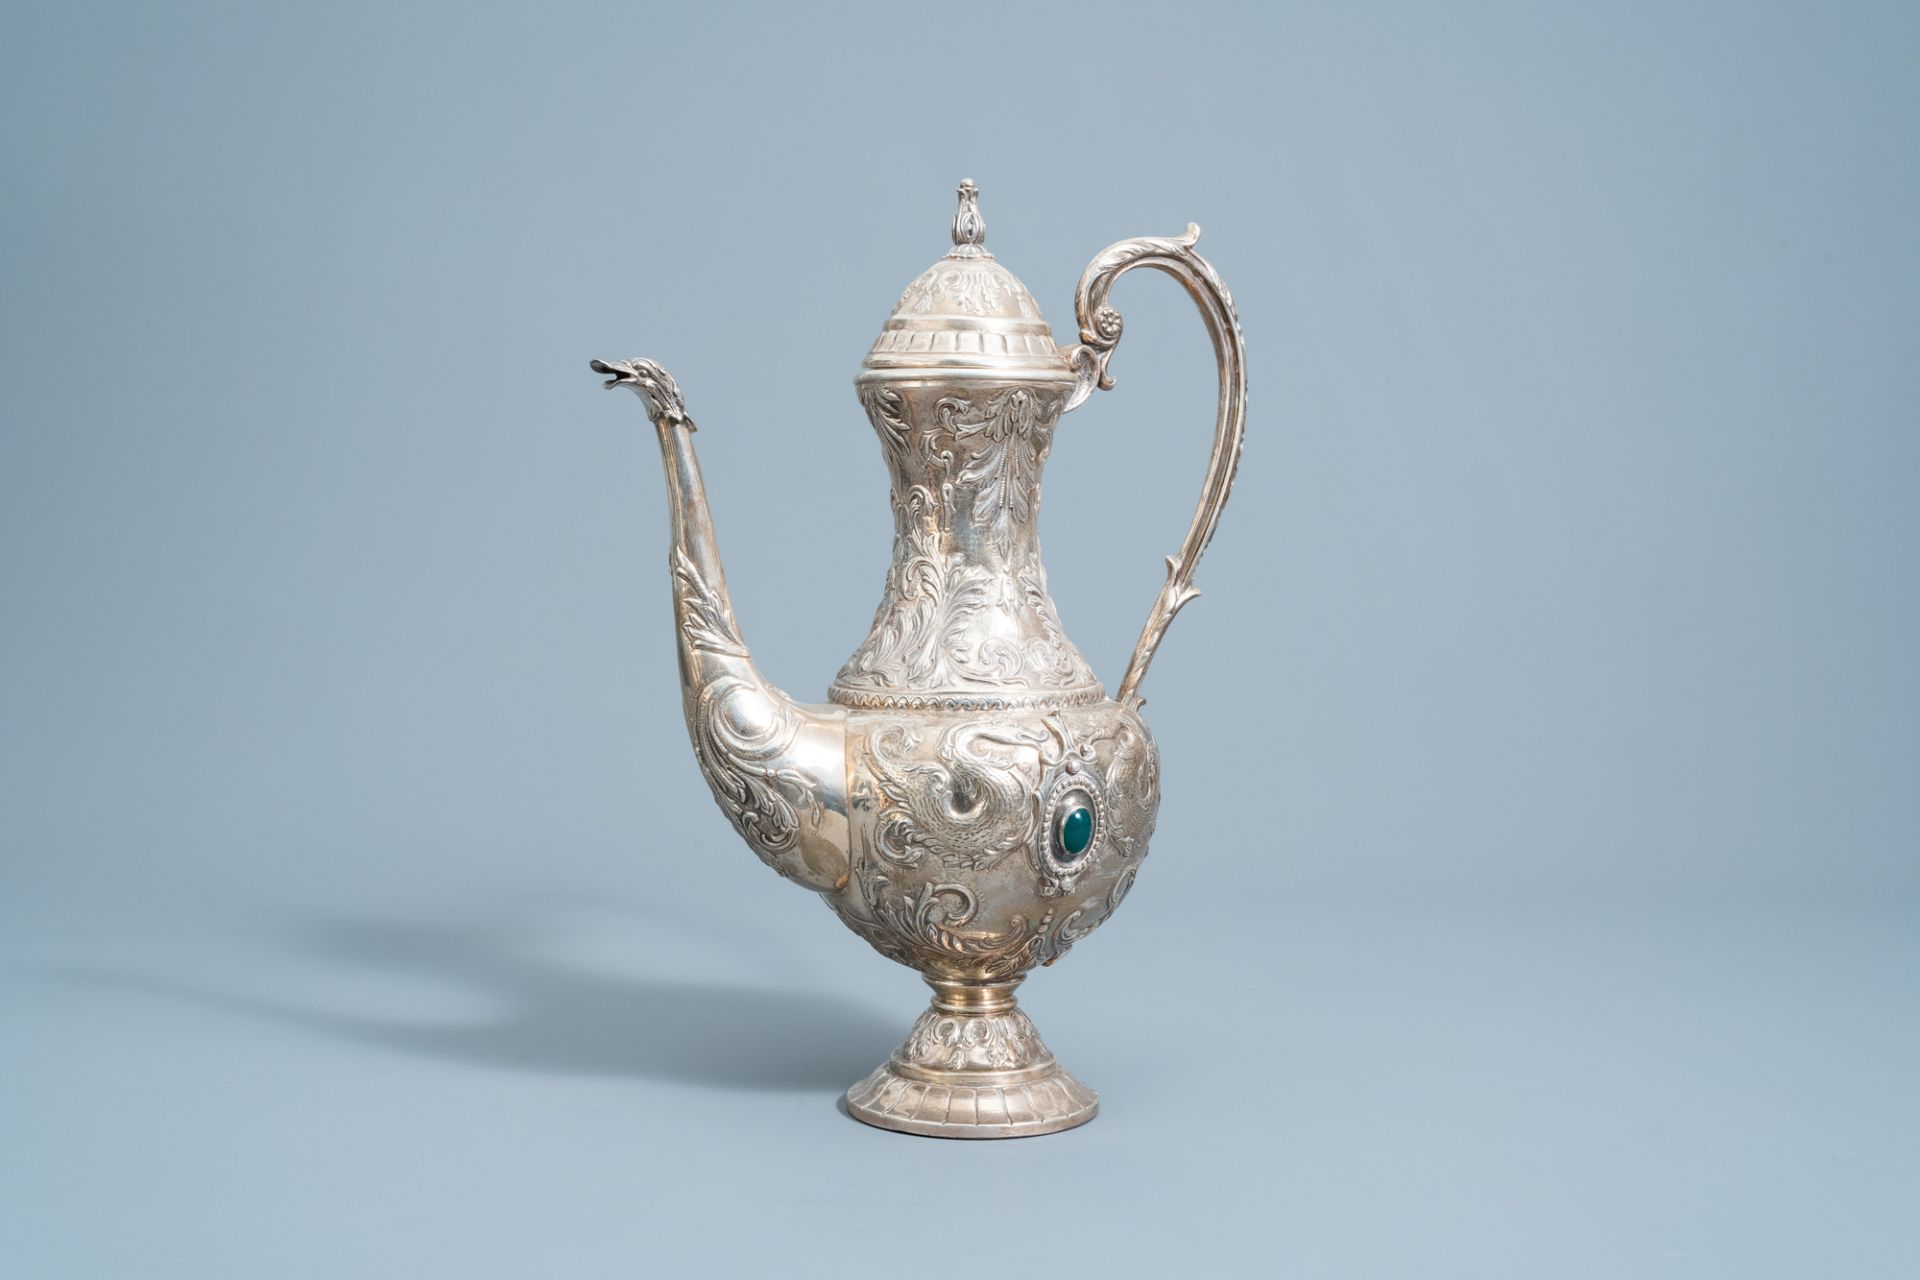 A Spanish inlaid silver Historicism jug with floral design and swans, 20th C.